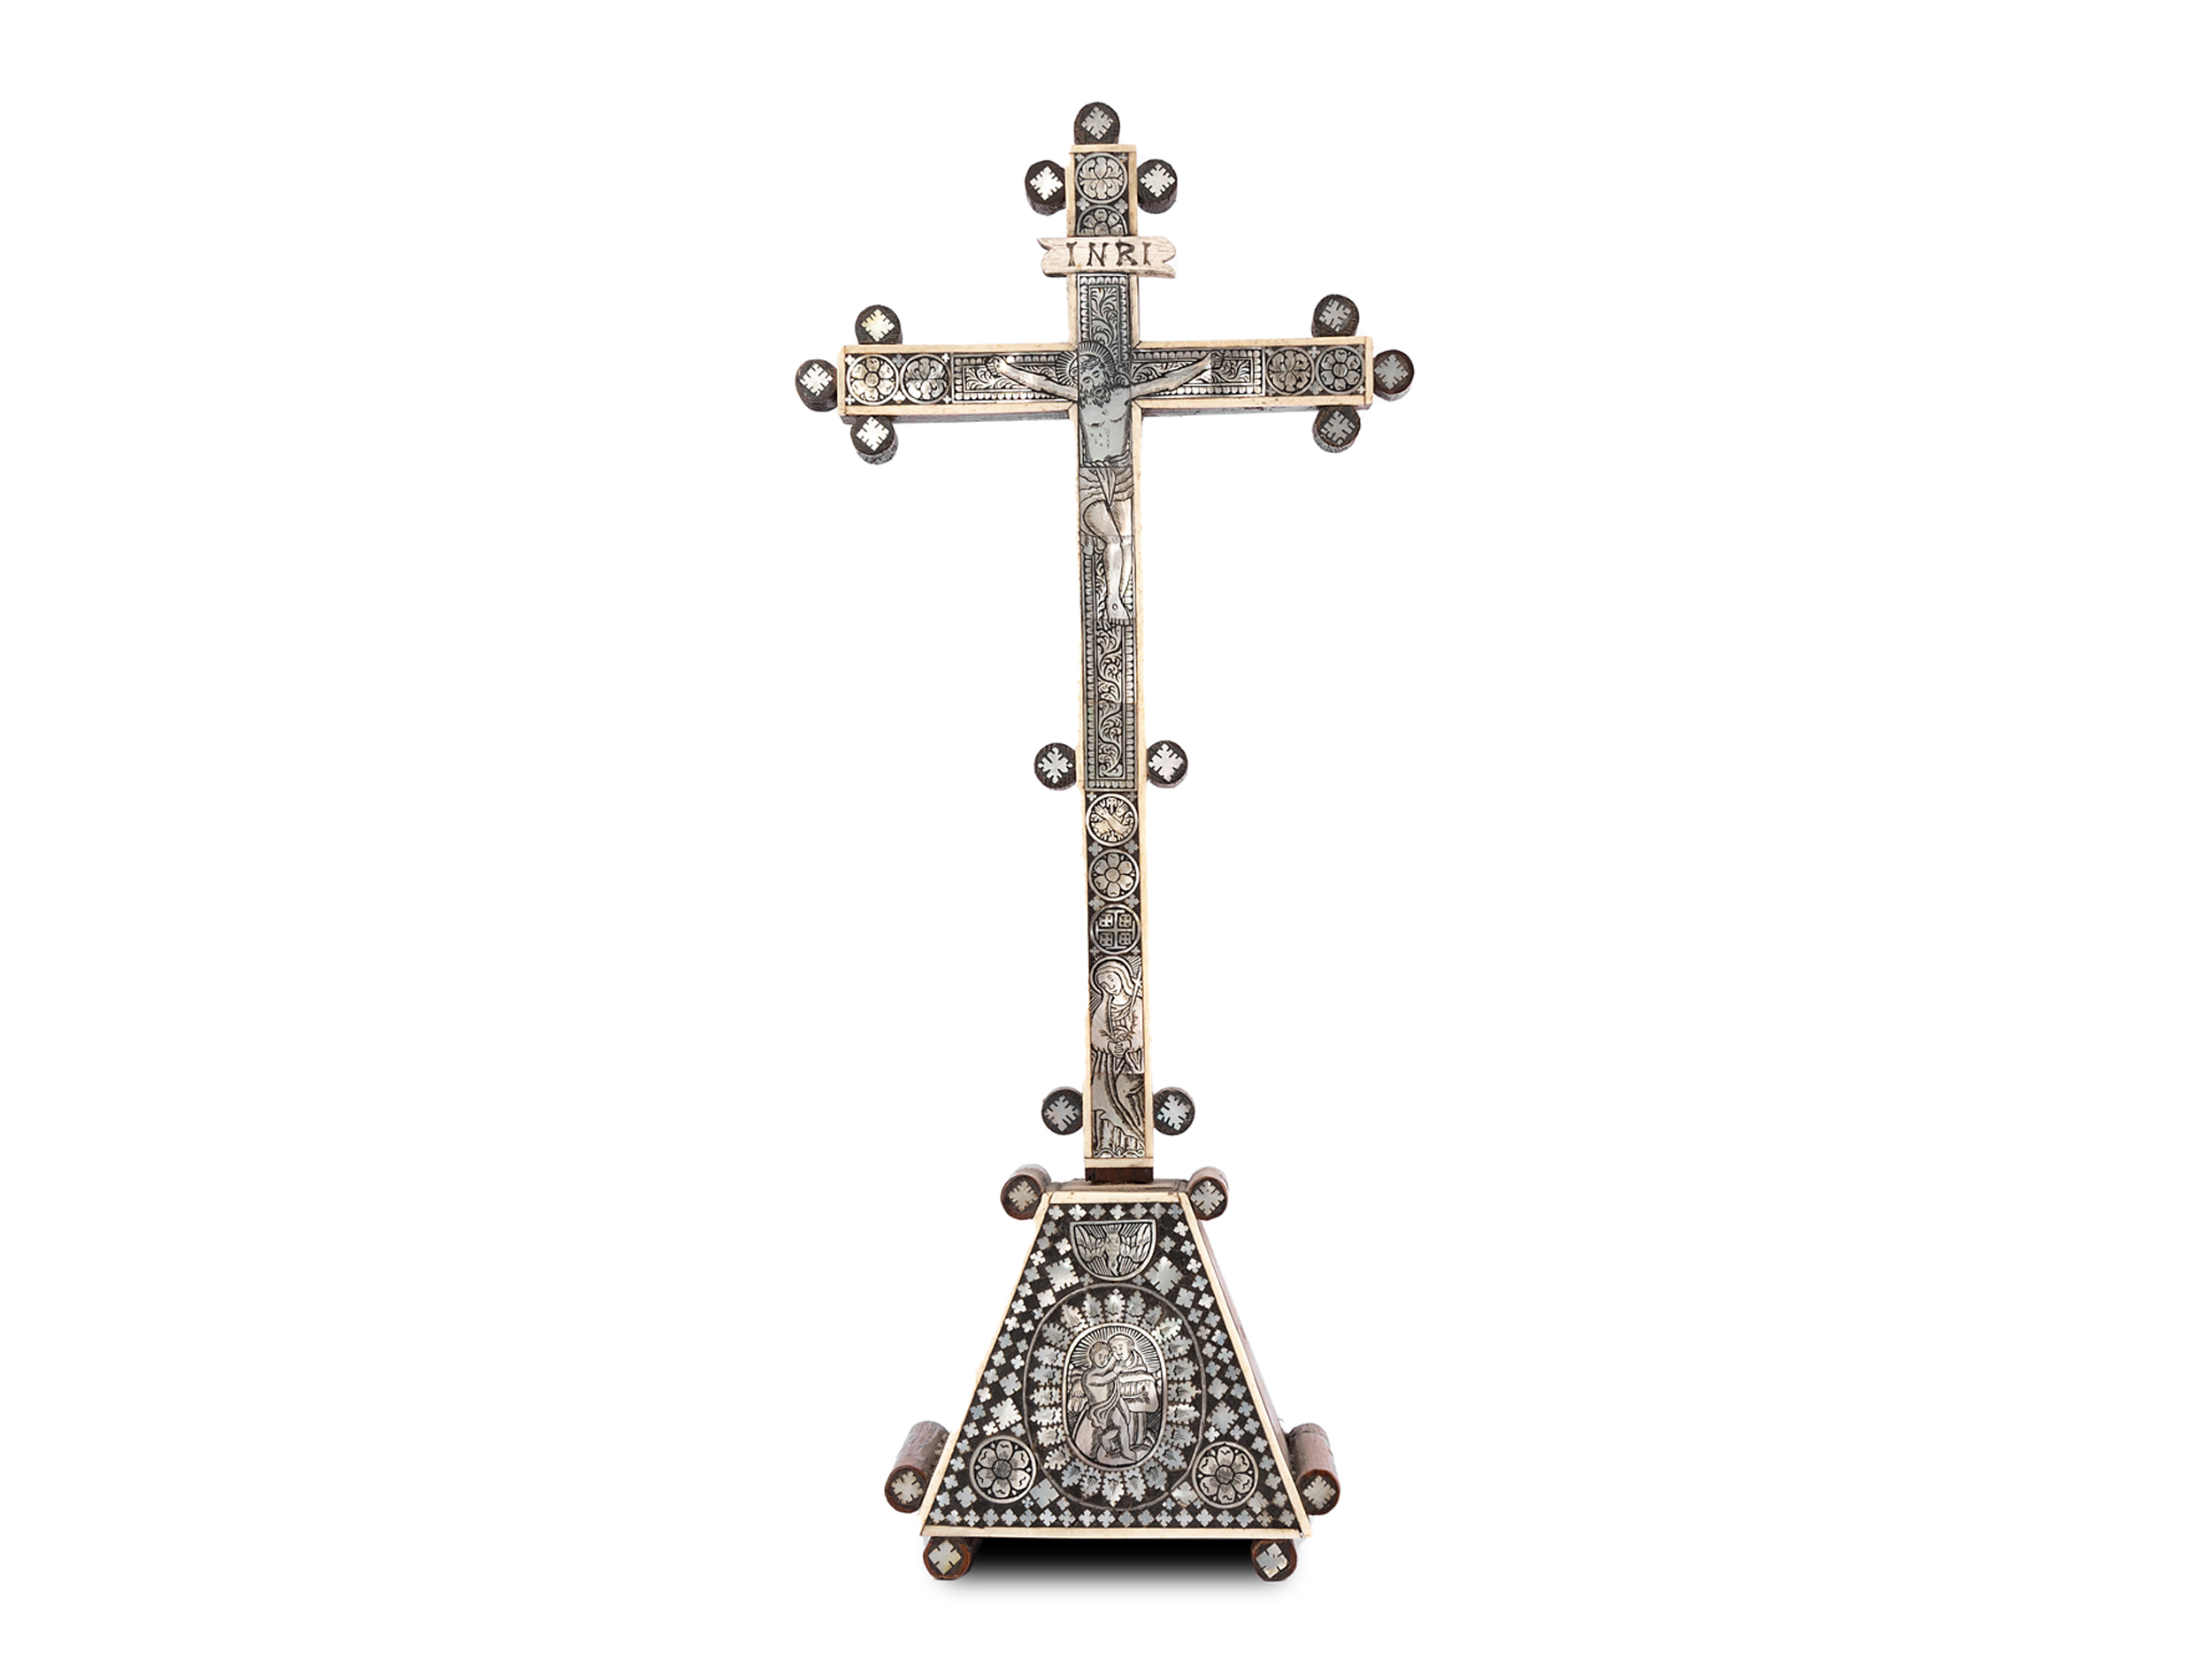 Standing cross, Walnut inlaid with mother-of-pearl & organic material